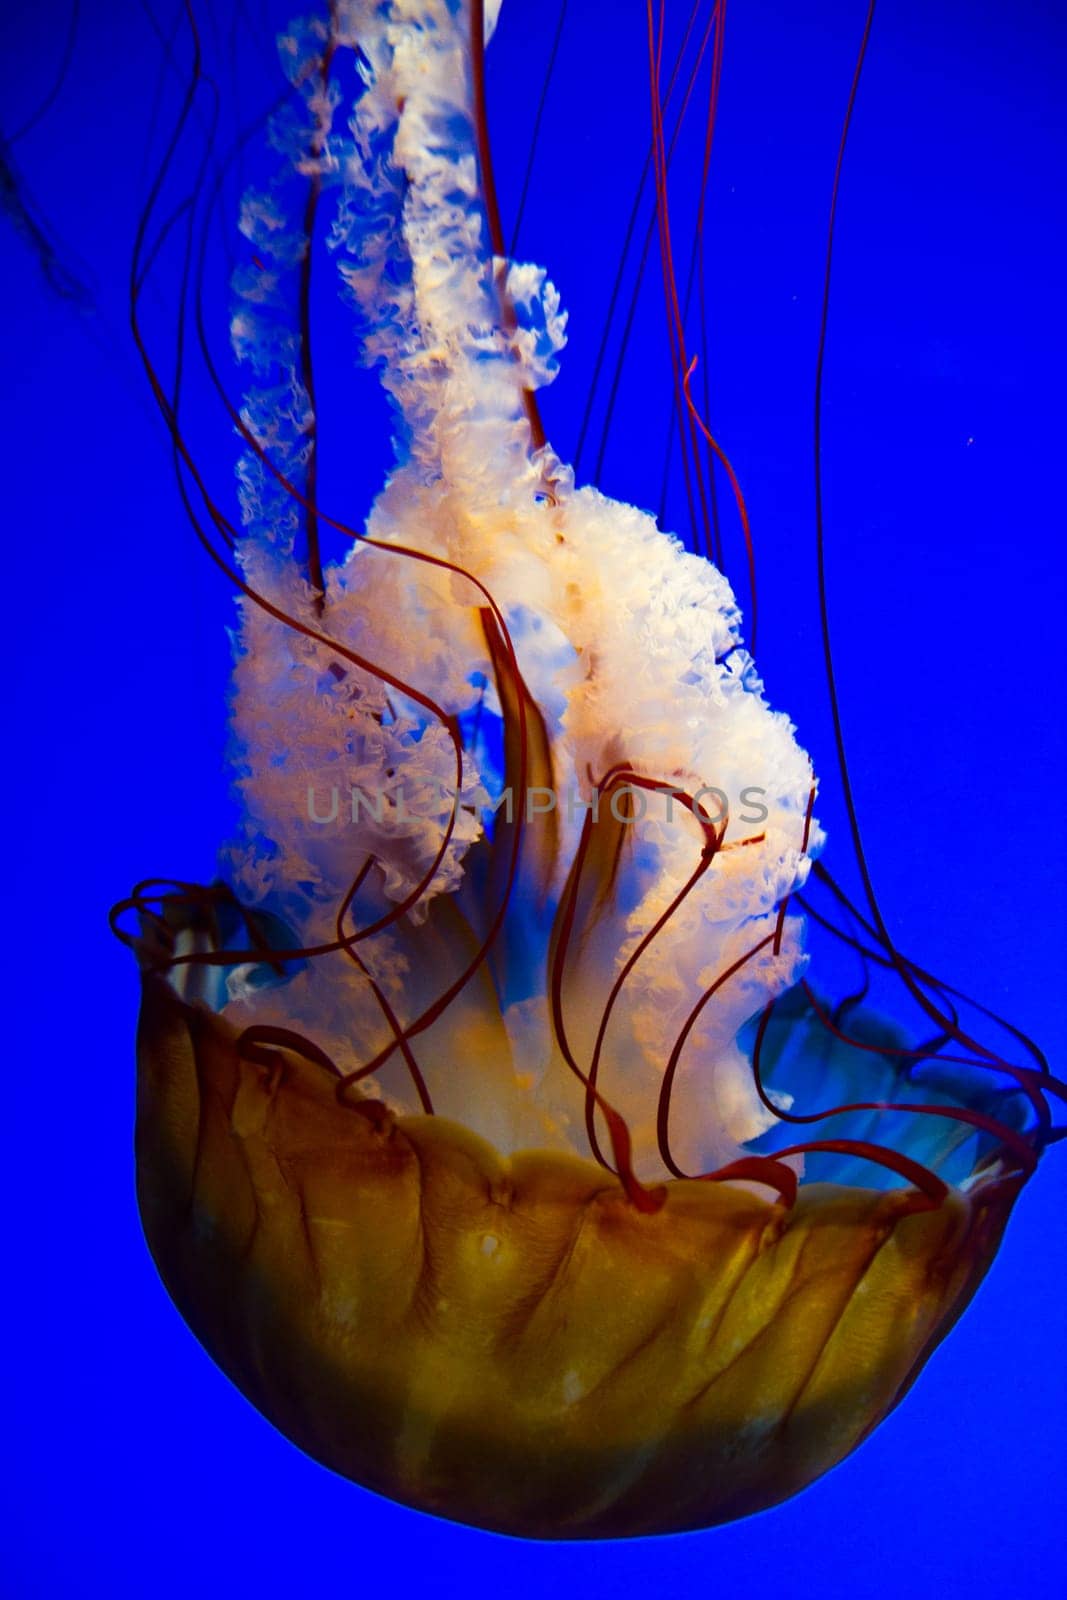 Captivating marine beauty: A mesmerizing jellyfish gracefully glows in warm hues against a deep blue backdrop, its delicate tentacles trailing behind. Perfect for nature, science, and design projects.